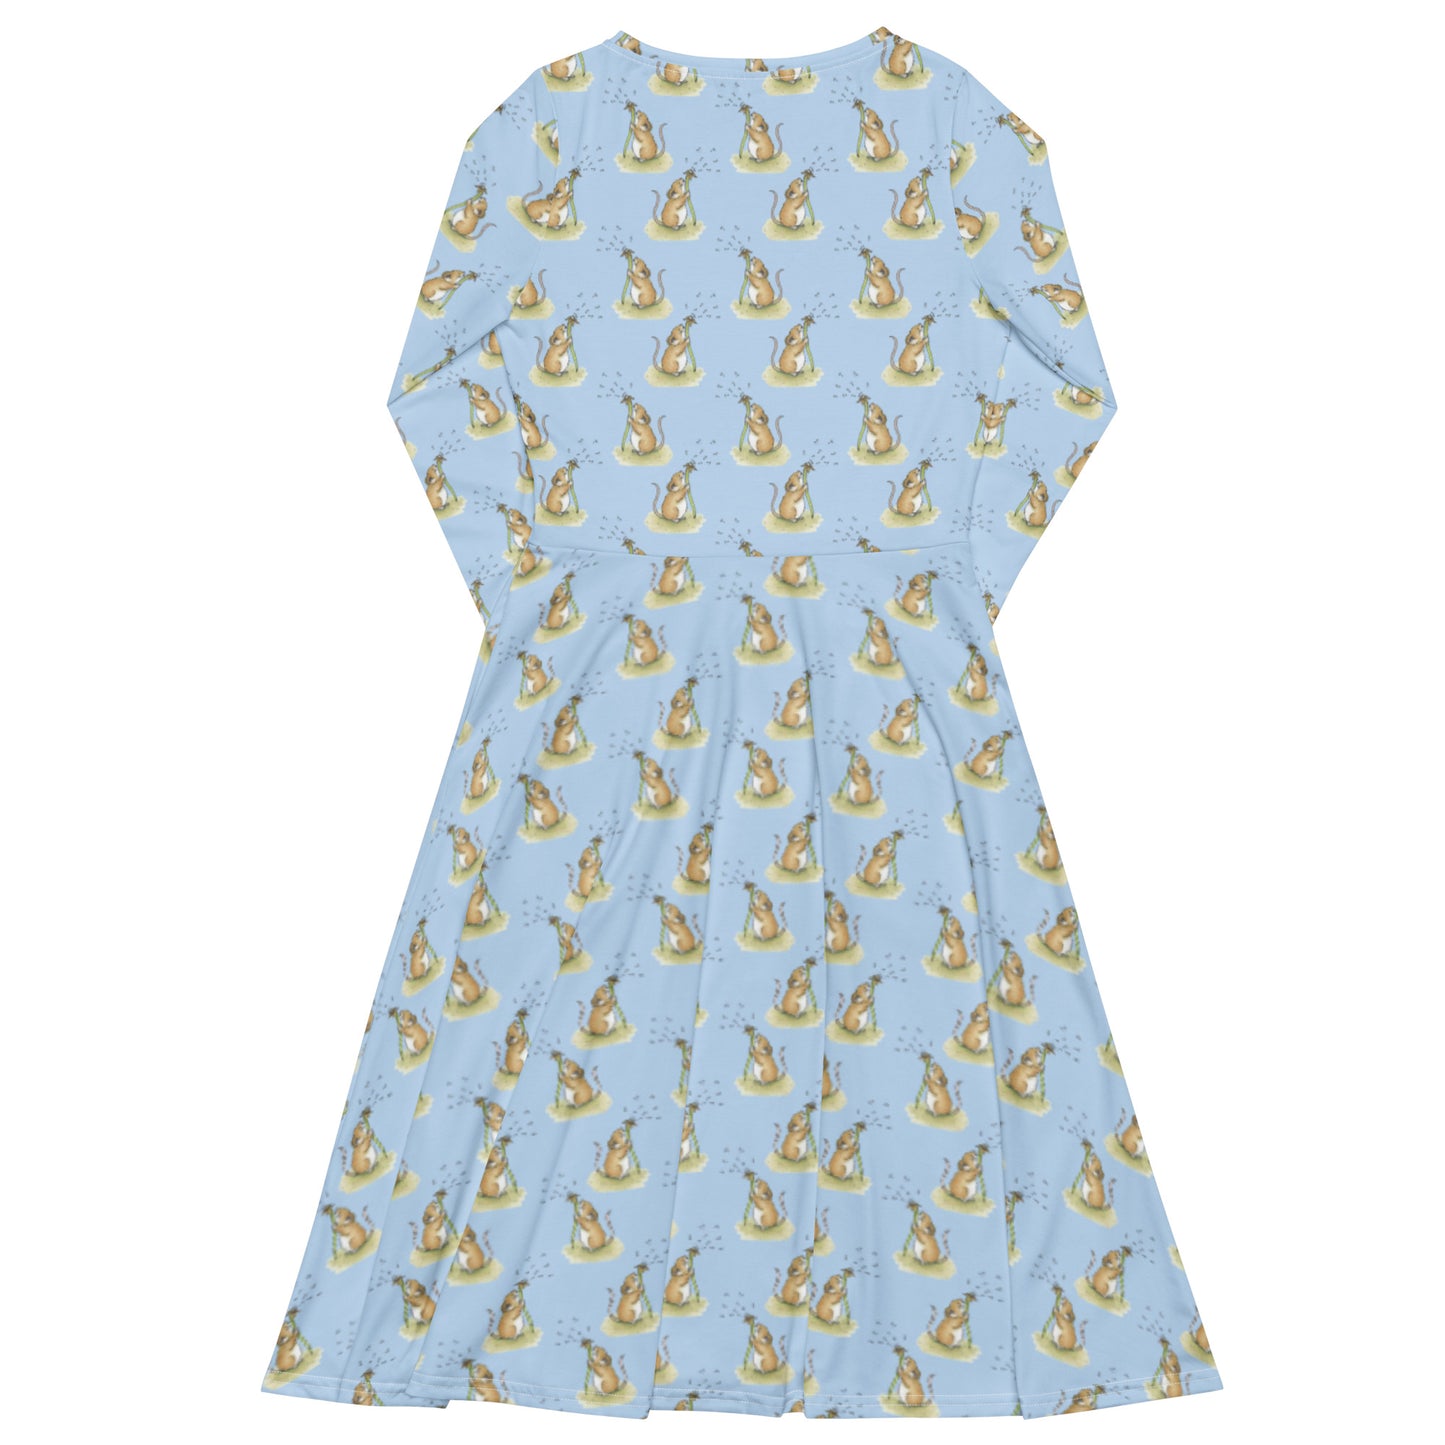 Dandelion Wish patterned long sleeve midi dress. Features patterned design of a mouse making a wish on a dandelion fluff against a light blue background. Dress has boat neckline, fitted waist, flared bottom, and side pockets. Flat lay showing the back of the dress.